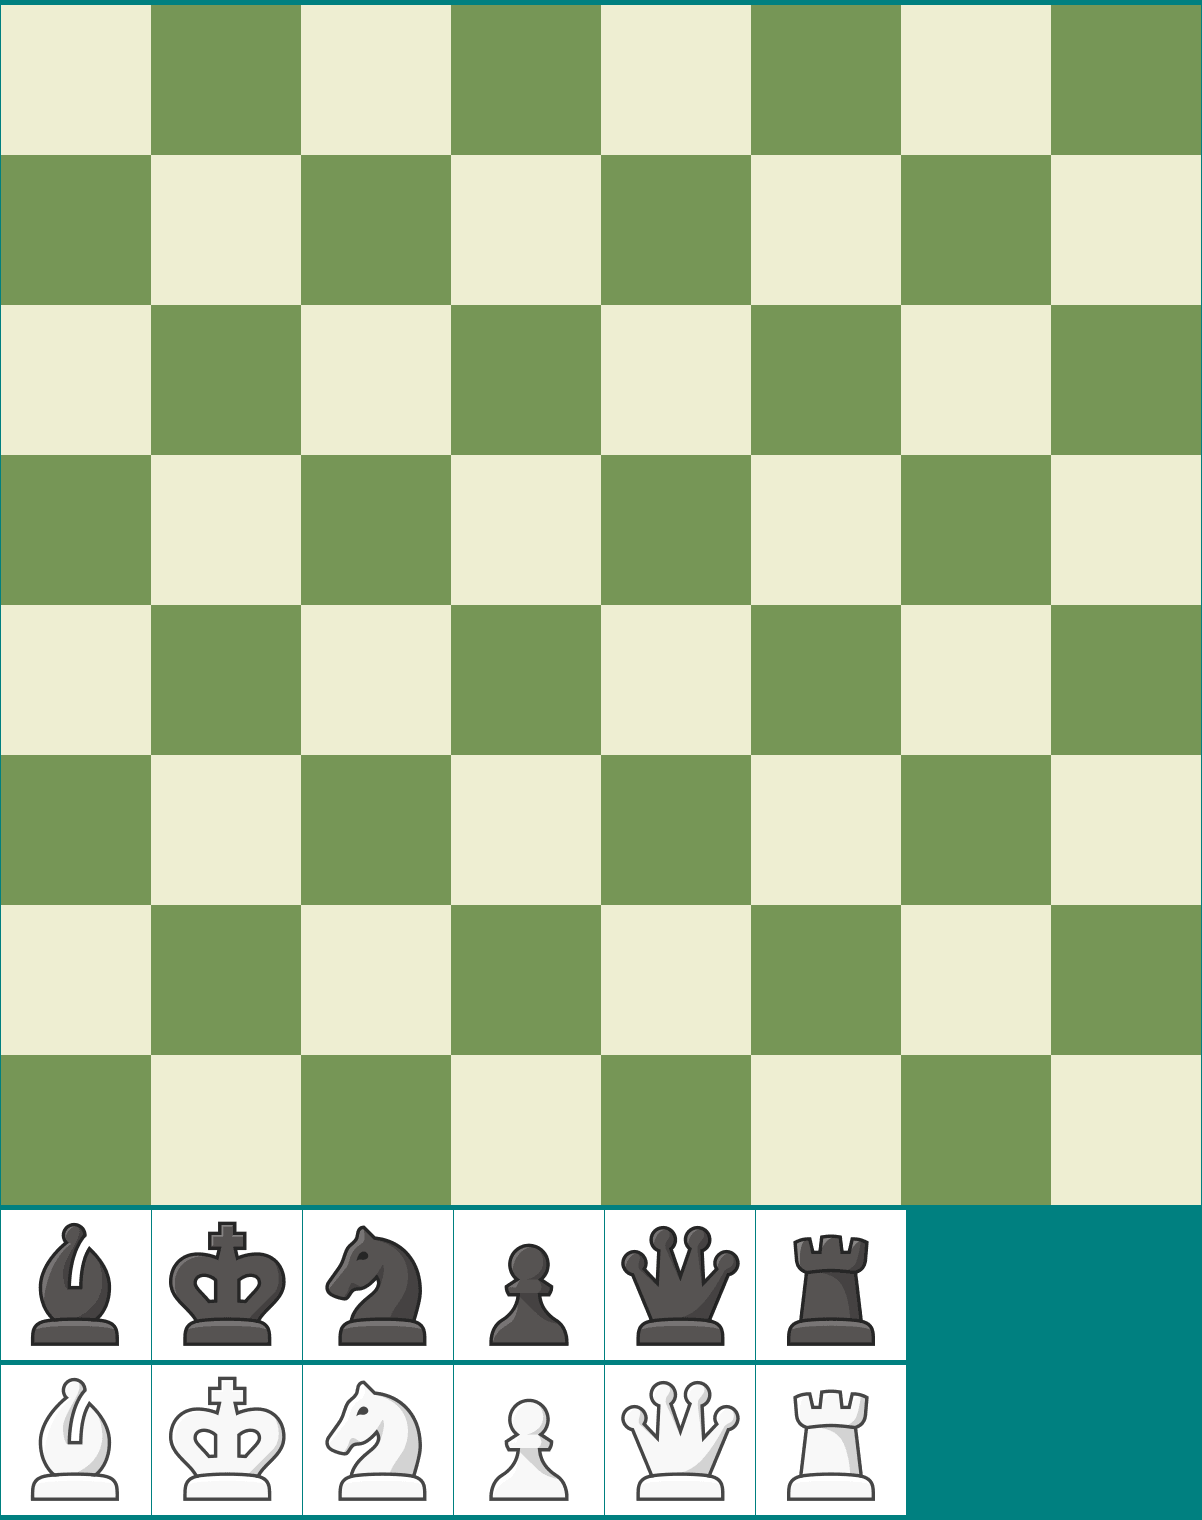 Board and Chess Pieces (Standard/Classic)